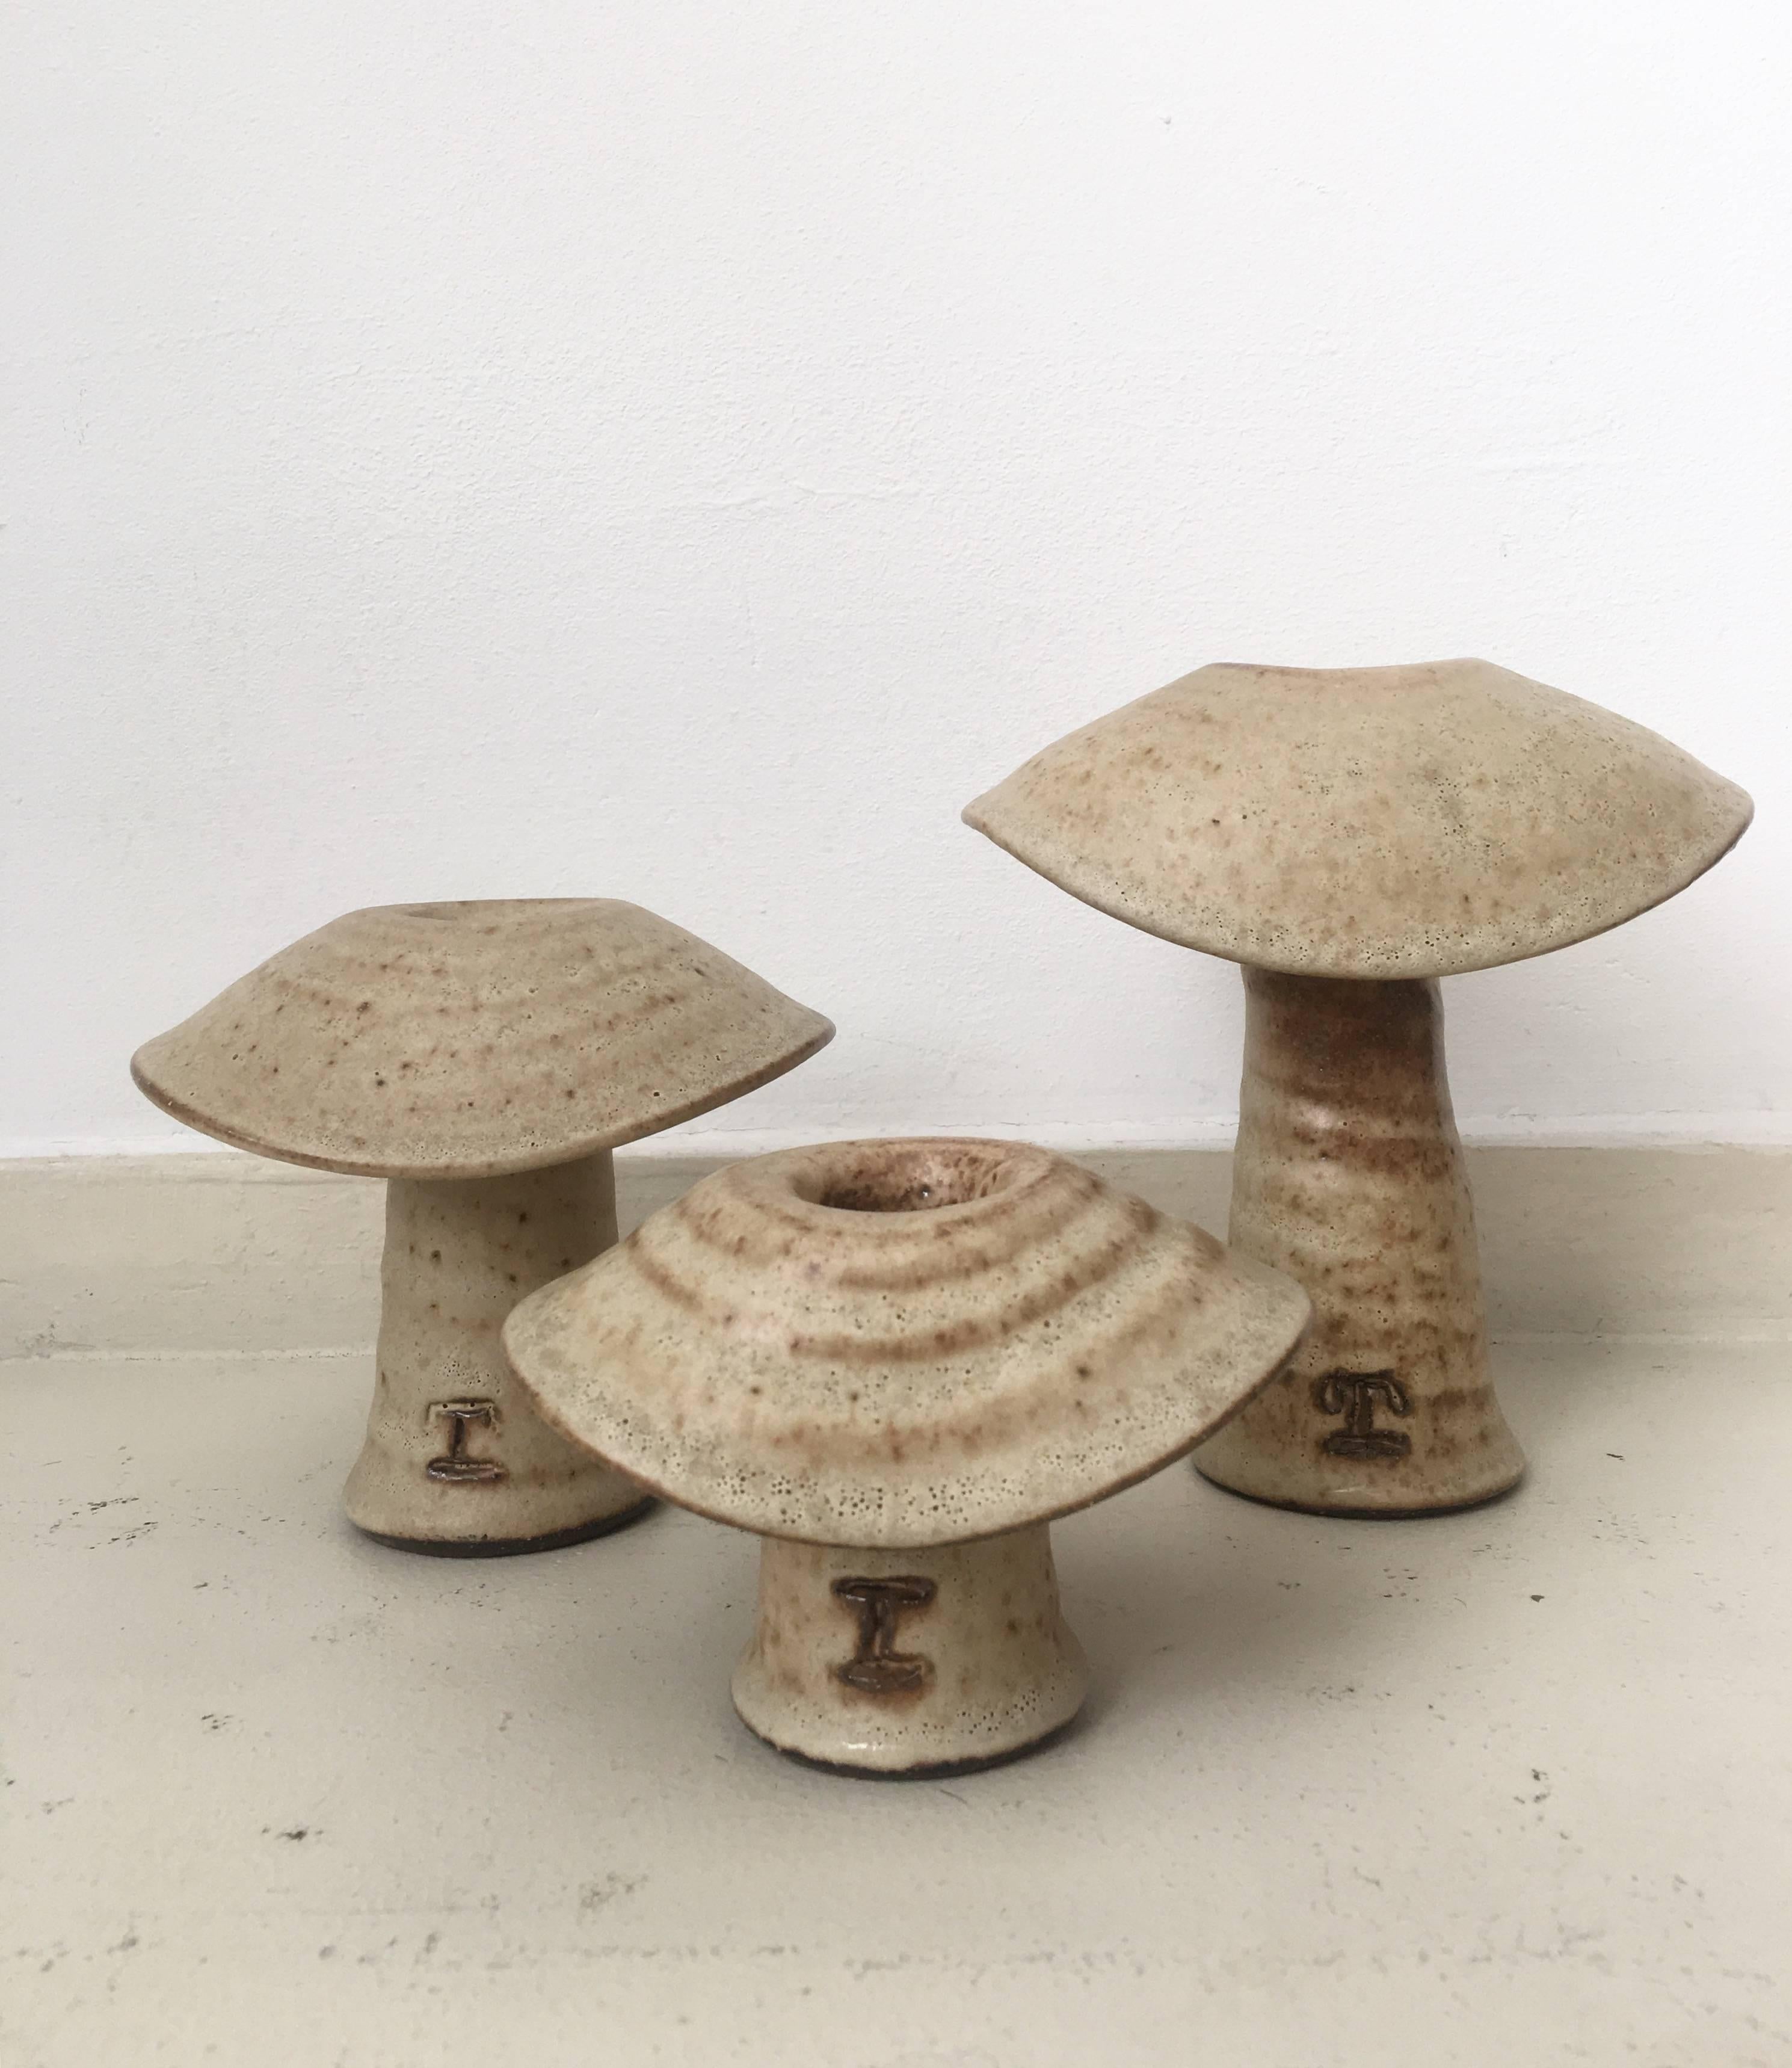 These mushroom like ceramic sculptures were created by the Dutch Ceramist Freek Berends in 1985. They were most likely created for decorative purpose but can also be used as small vases. They all feature some kind of stamp to the front and they were